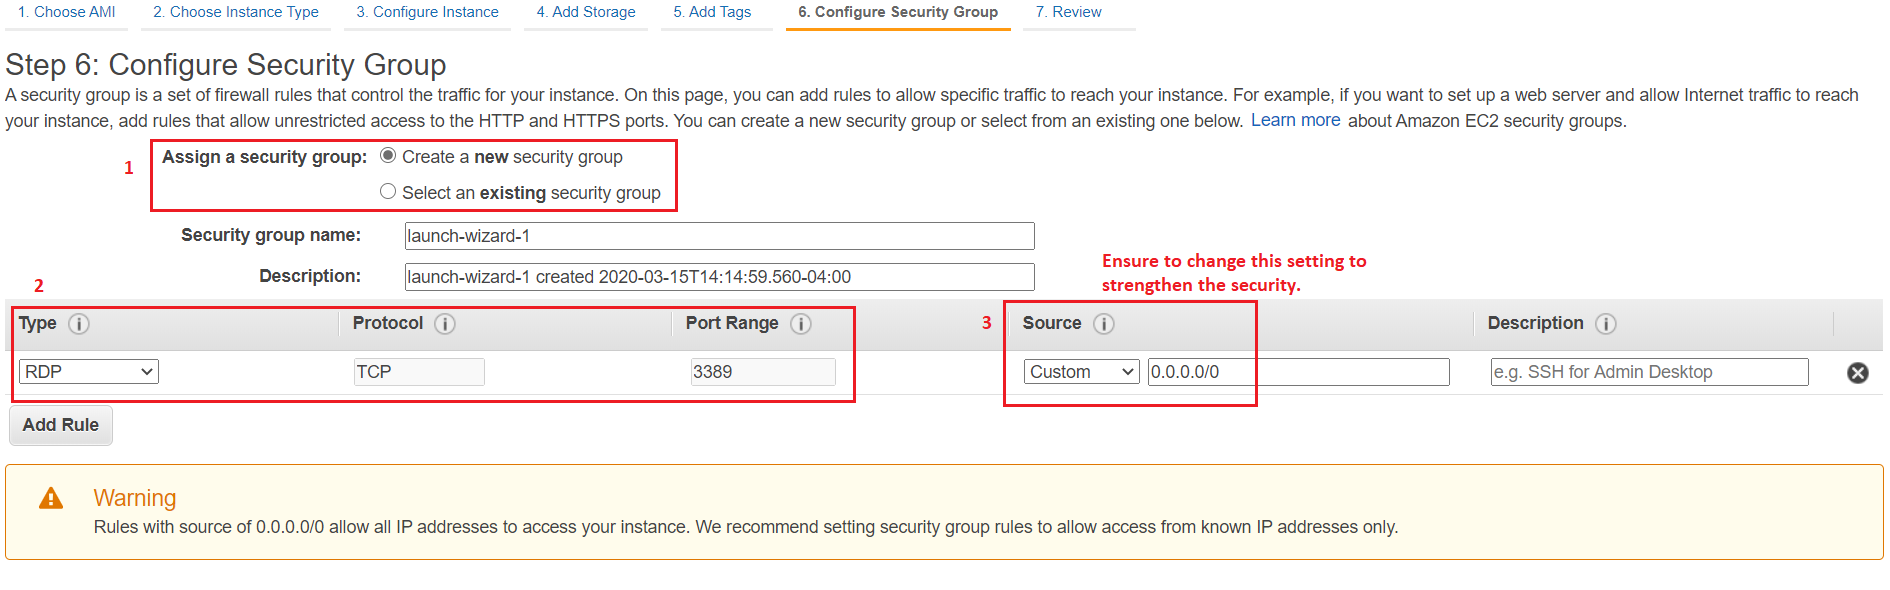 7 Configuring Security Group